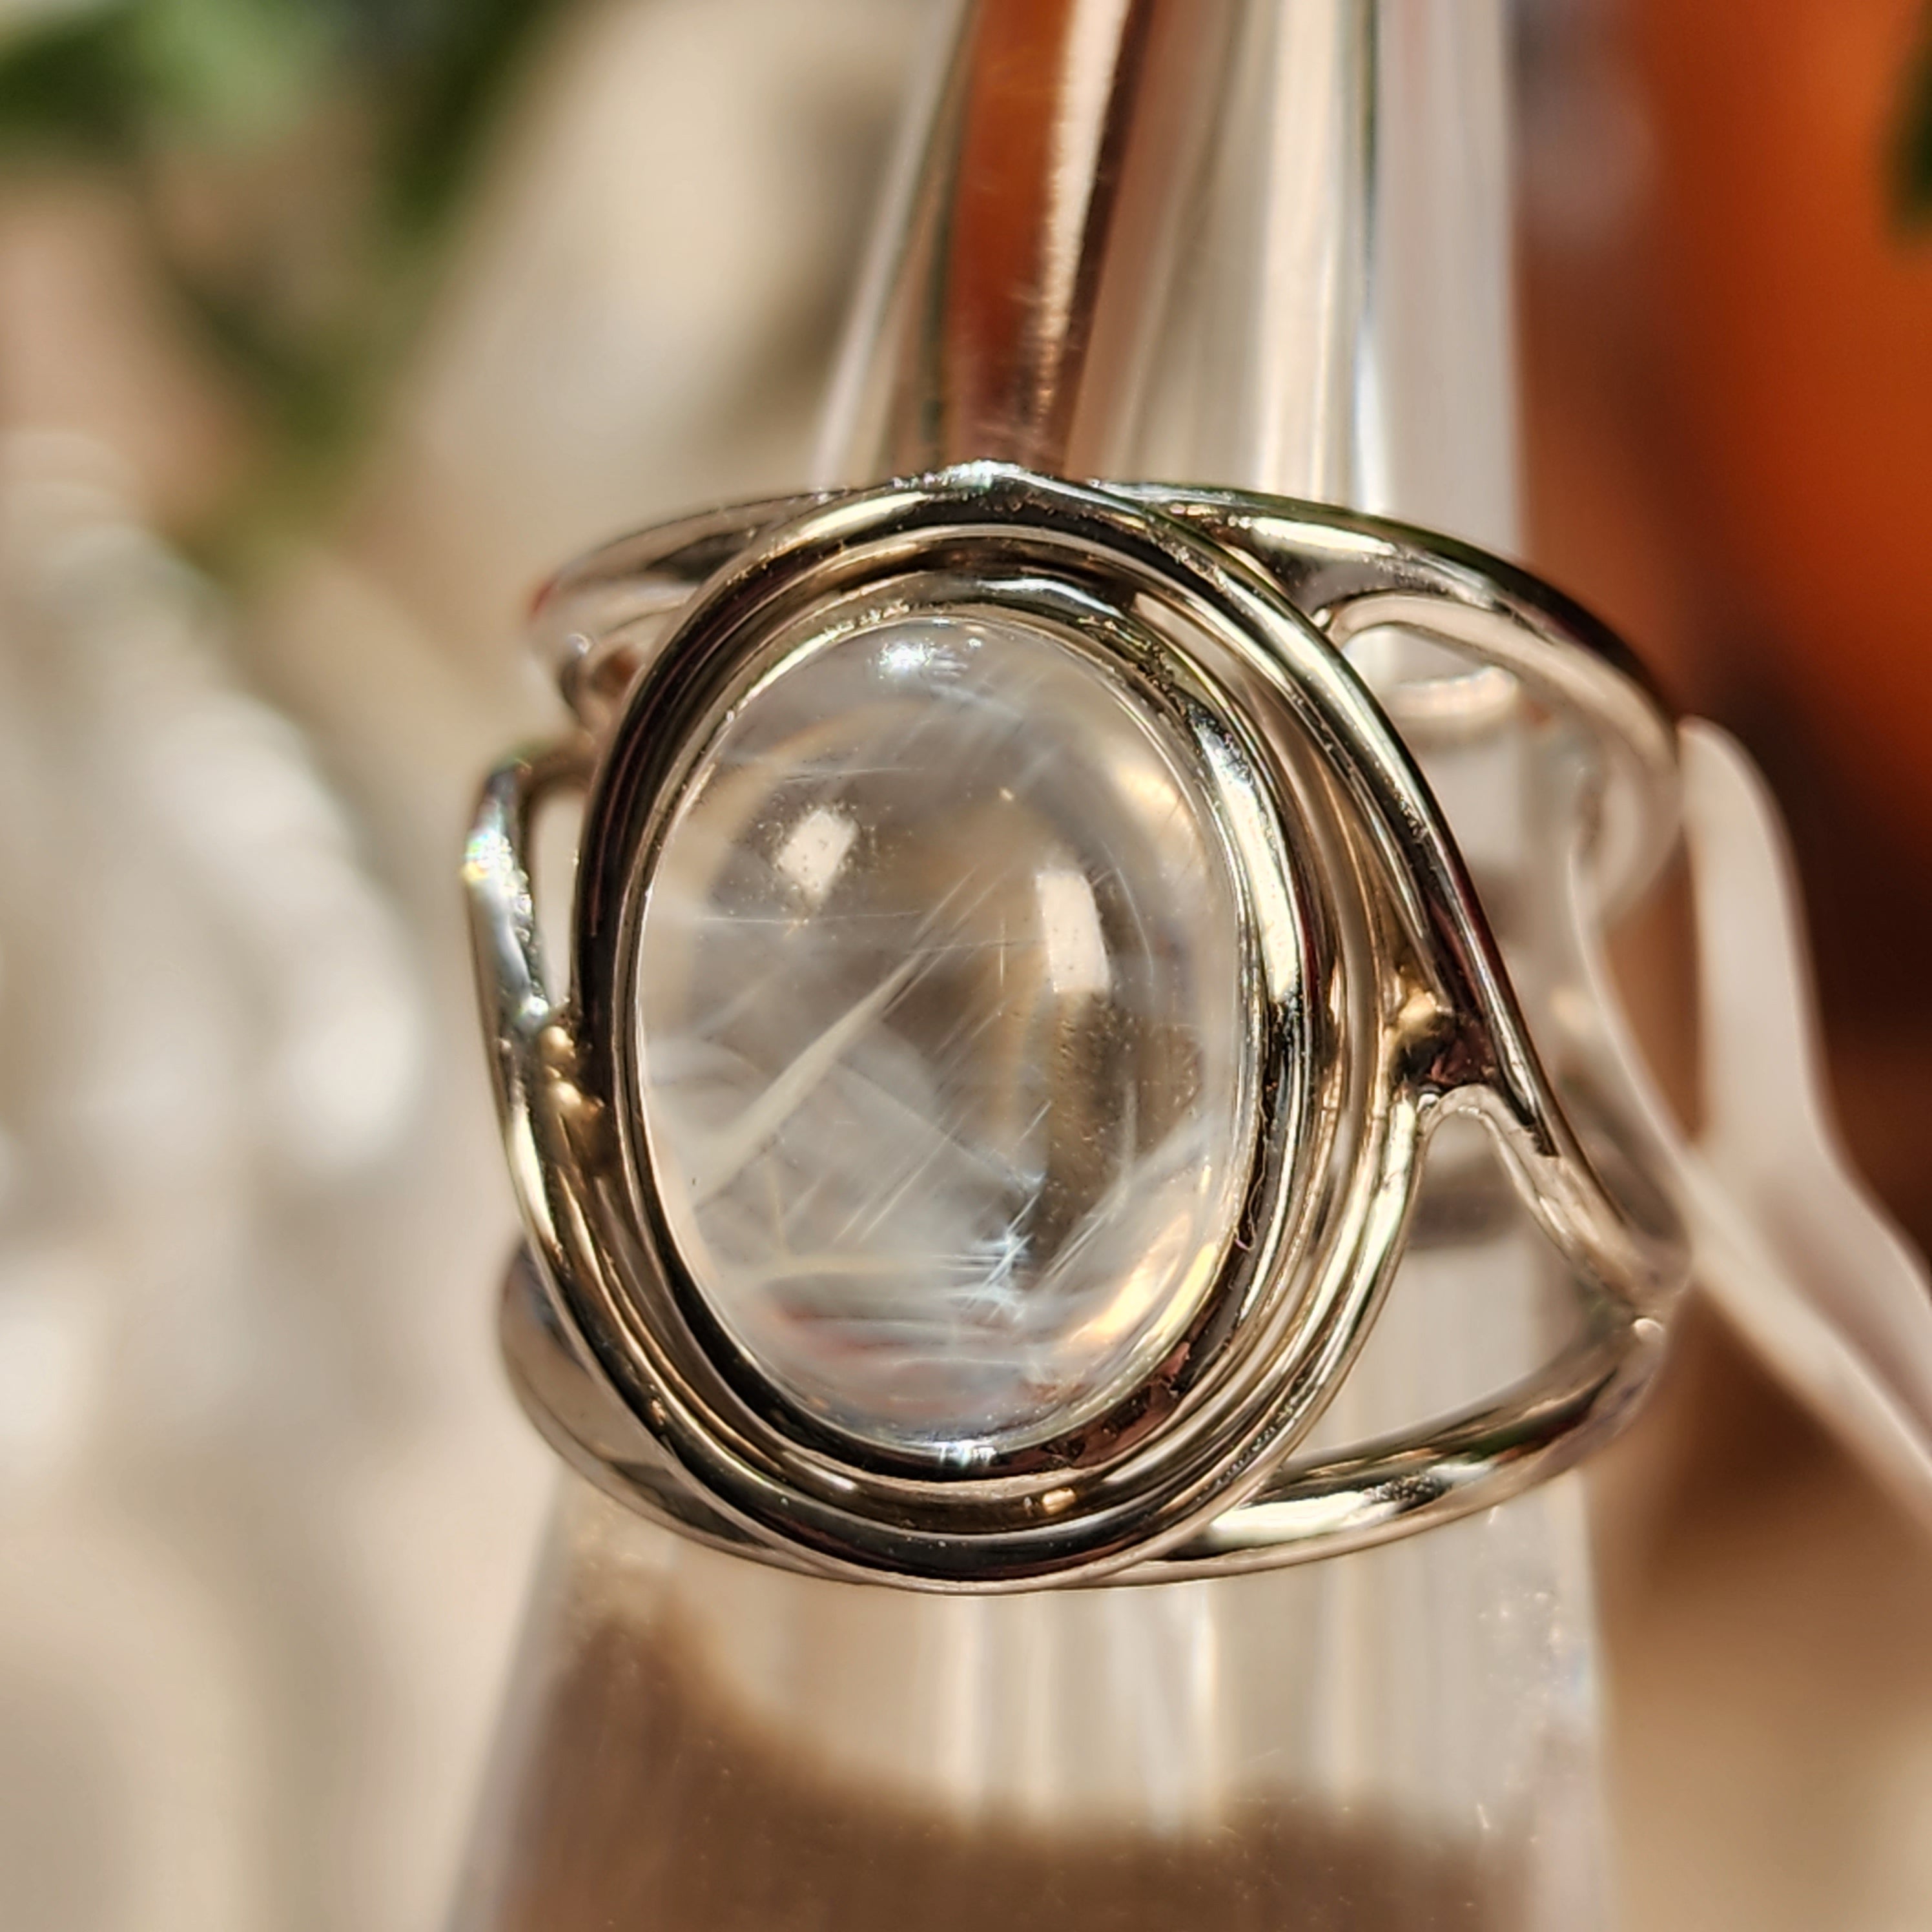 Blue Smoke Lemurian Quartz Finger Cuff Adjustable Ring .925 Silver for Ascension, Connection with Guides and Meditation